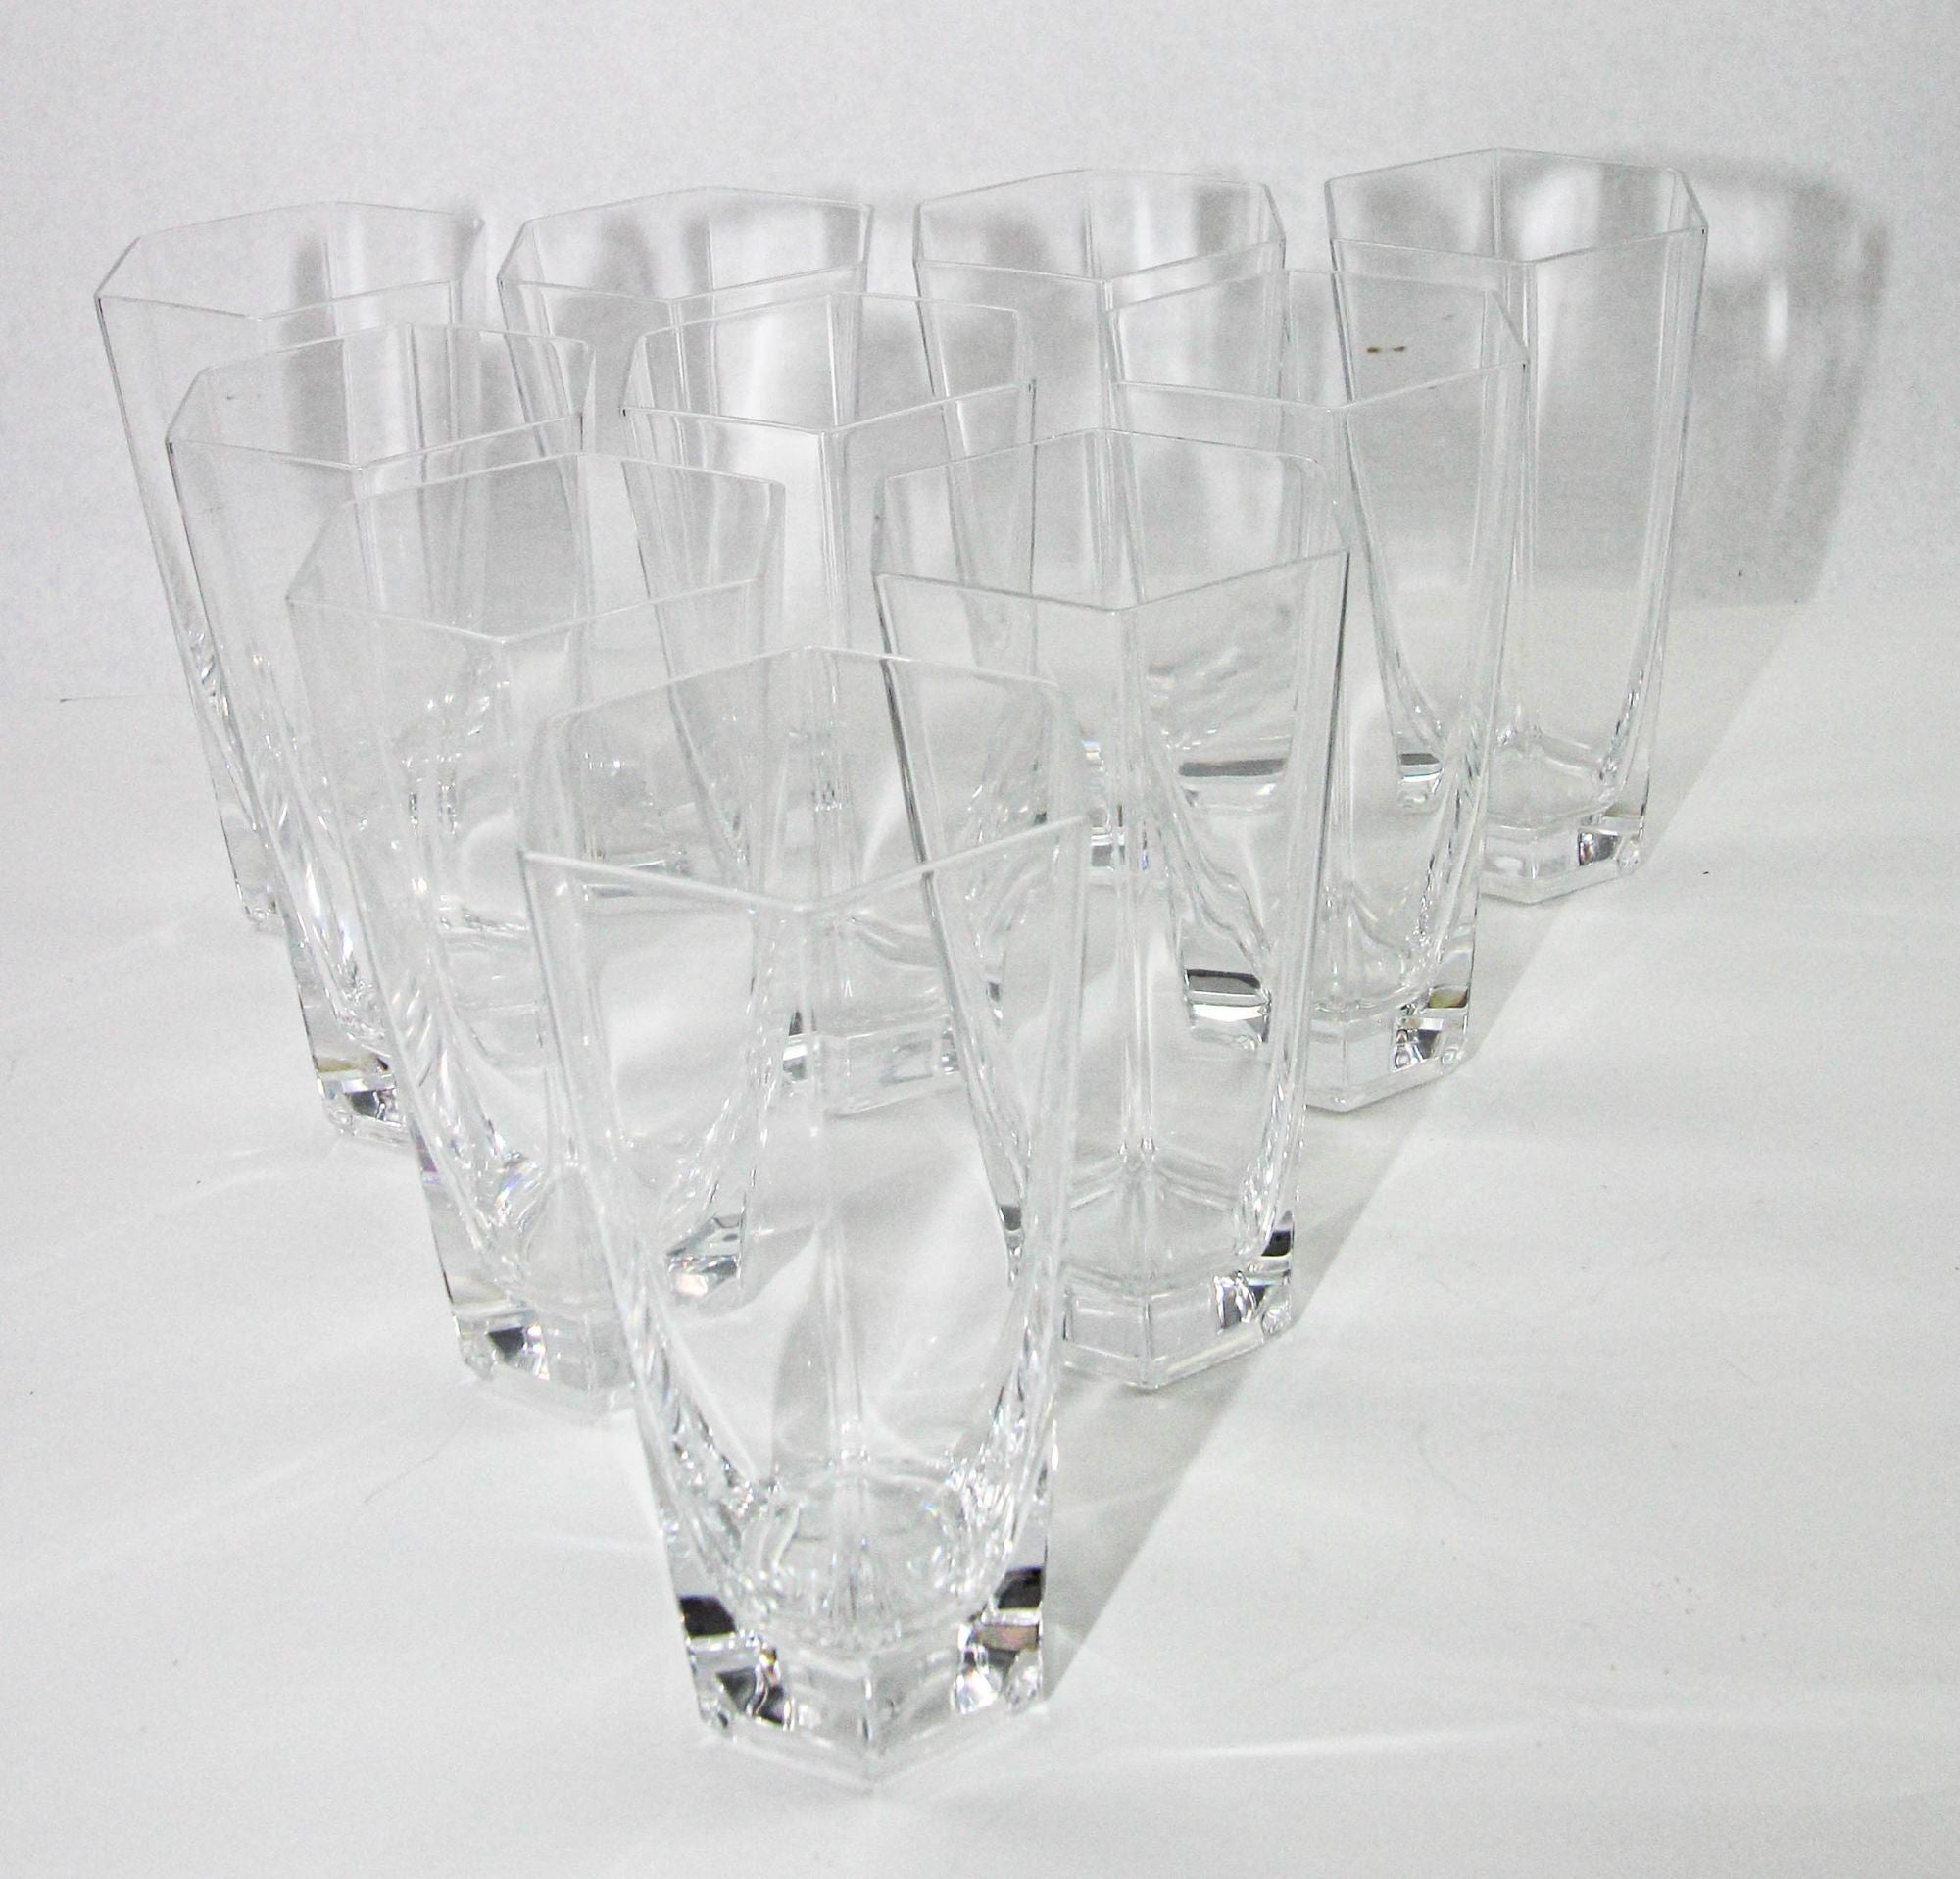 Very rare to find Tiffany & Co. set of eight exquisite crystal highball drinking glasses inspired by the architectural brilliance of Frank Lloyd Wright (American, 1867 - 1959). 
Created circa 1986, each glass in this collection bears the signature